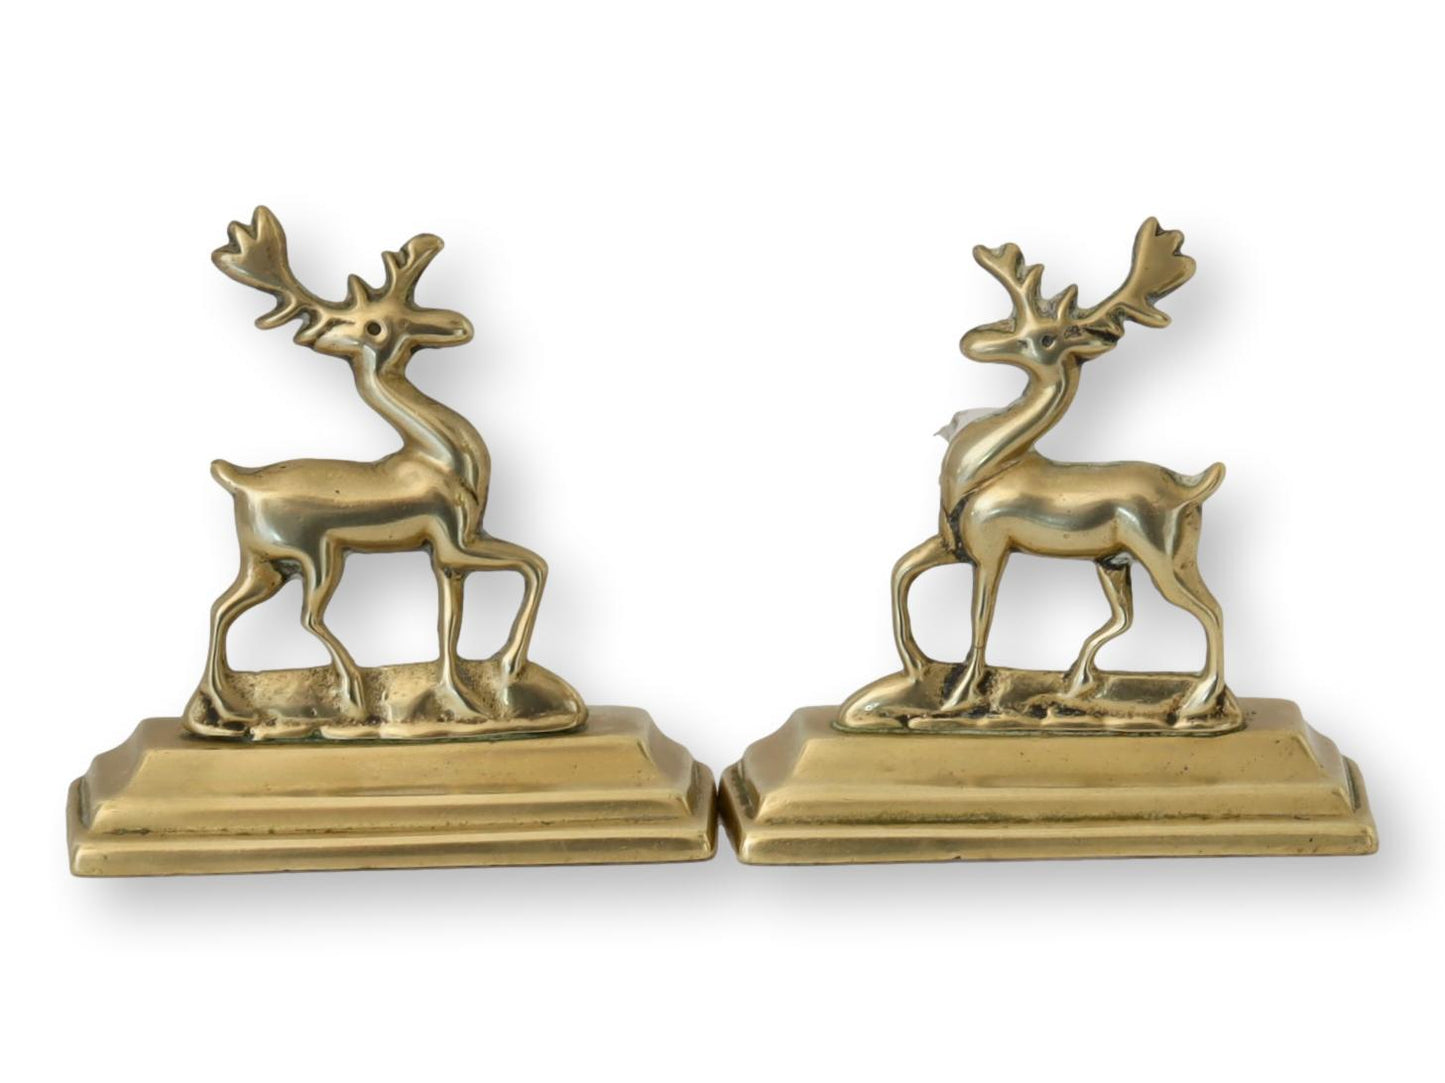 Antique English Deer Fireplace Ornaments